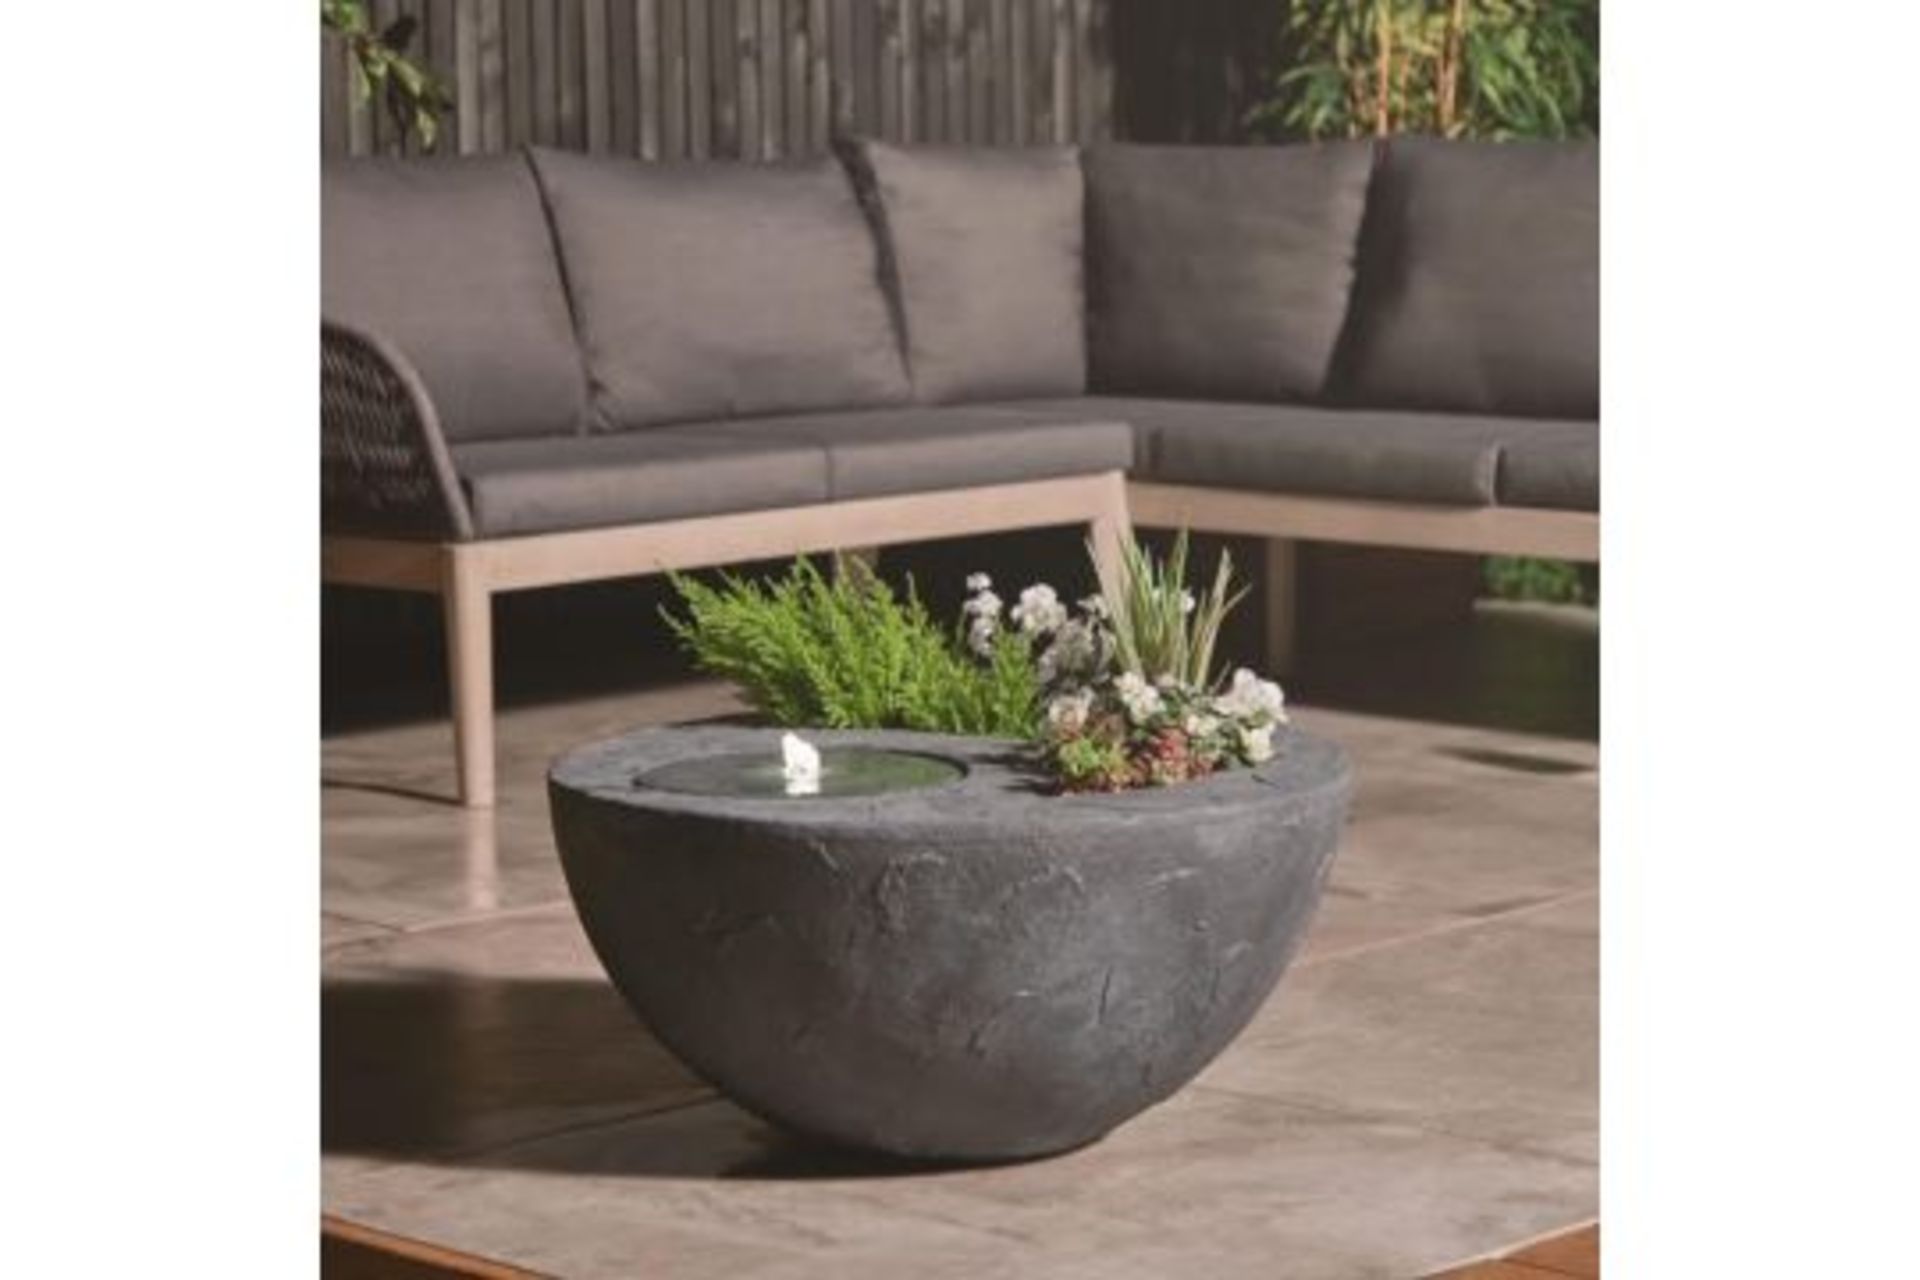 New & Boxed Dual Water Feature and Planter. RRP £299.99 (REF726) - Garden Bowl Design Planter, - Image 3 of 7